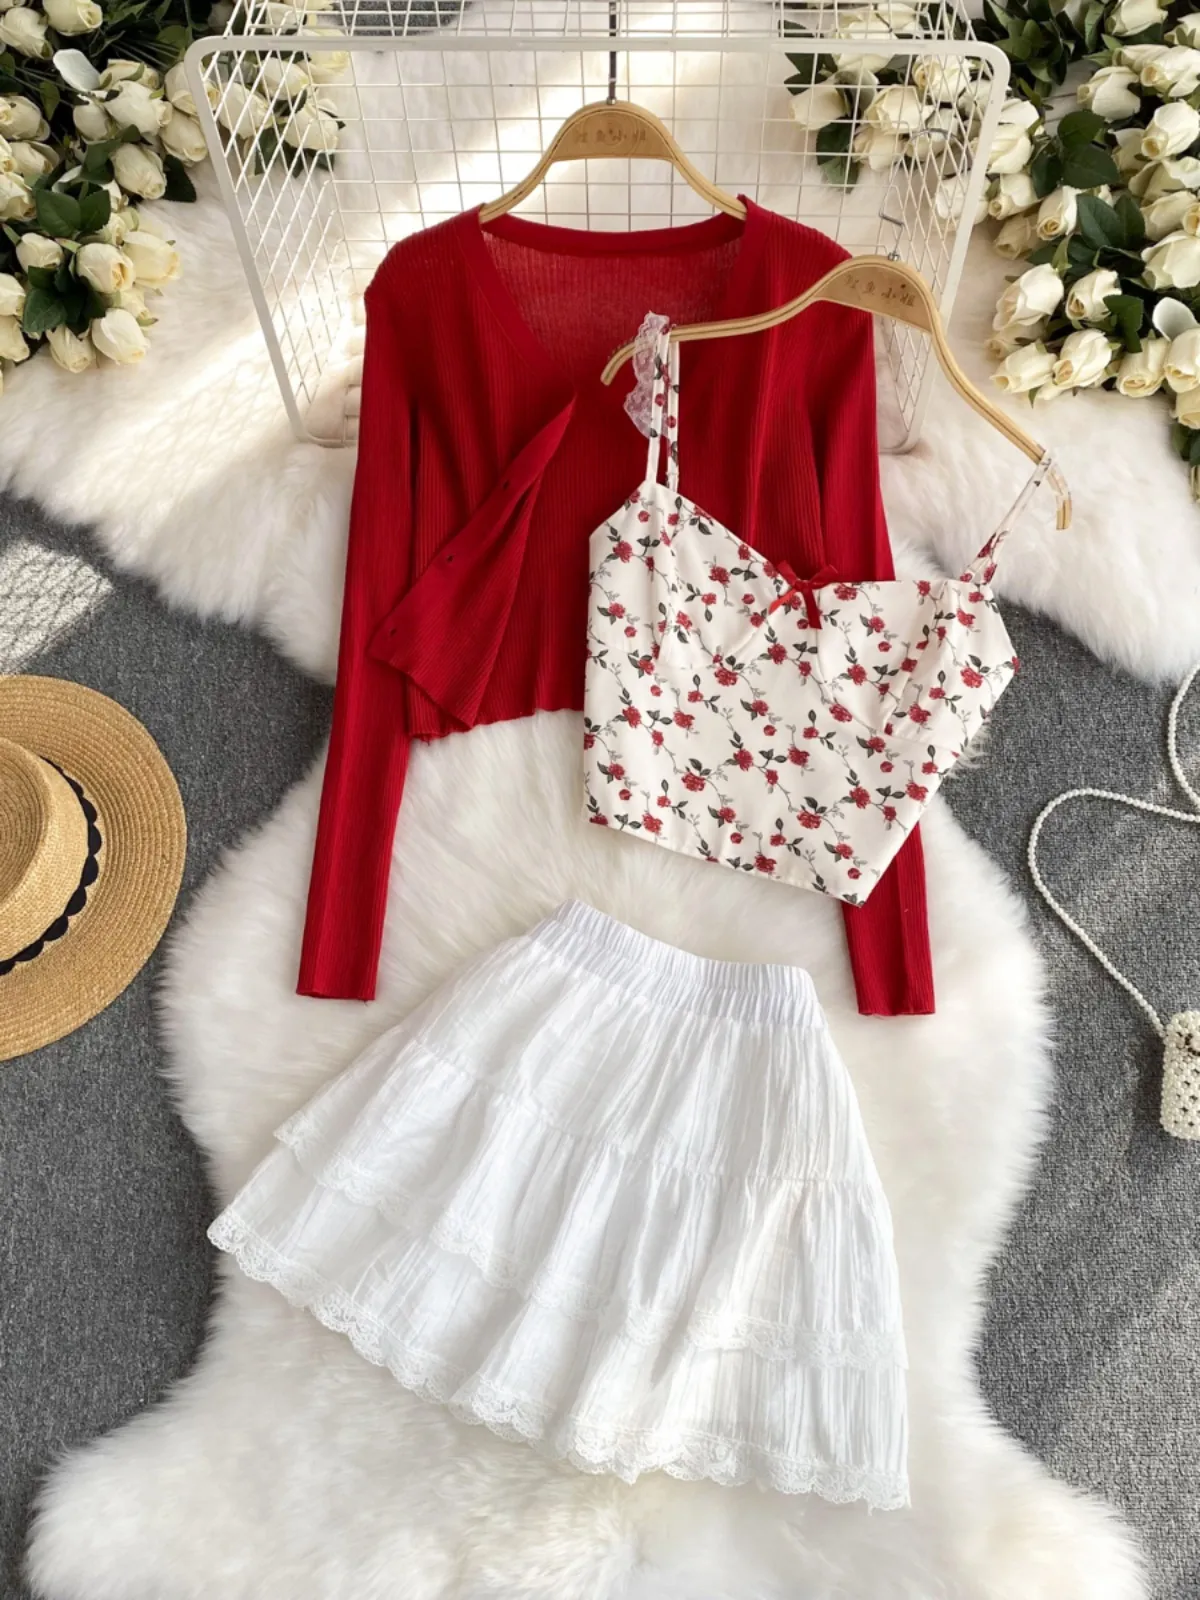 Pure Desire Style Three Piece Set for Women's Summer Dating Wear Sweet Fragrant Flower Suspended Tank Top, Shawl, Cardigan, Fluffy Half Skirt